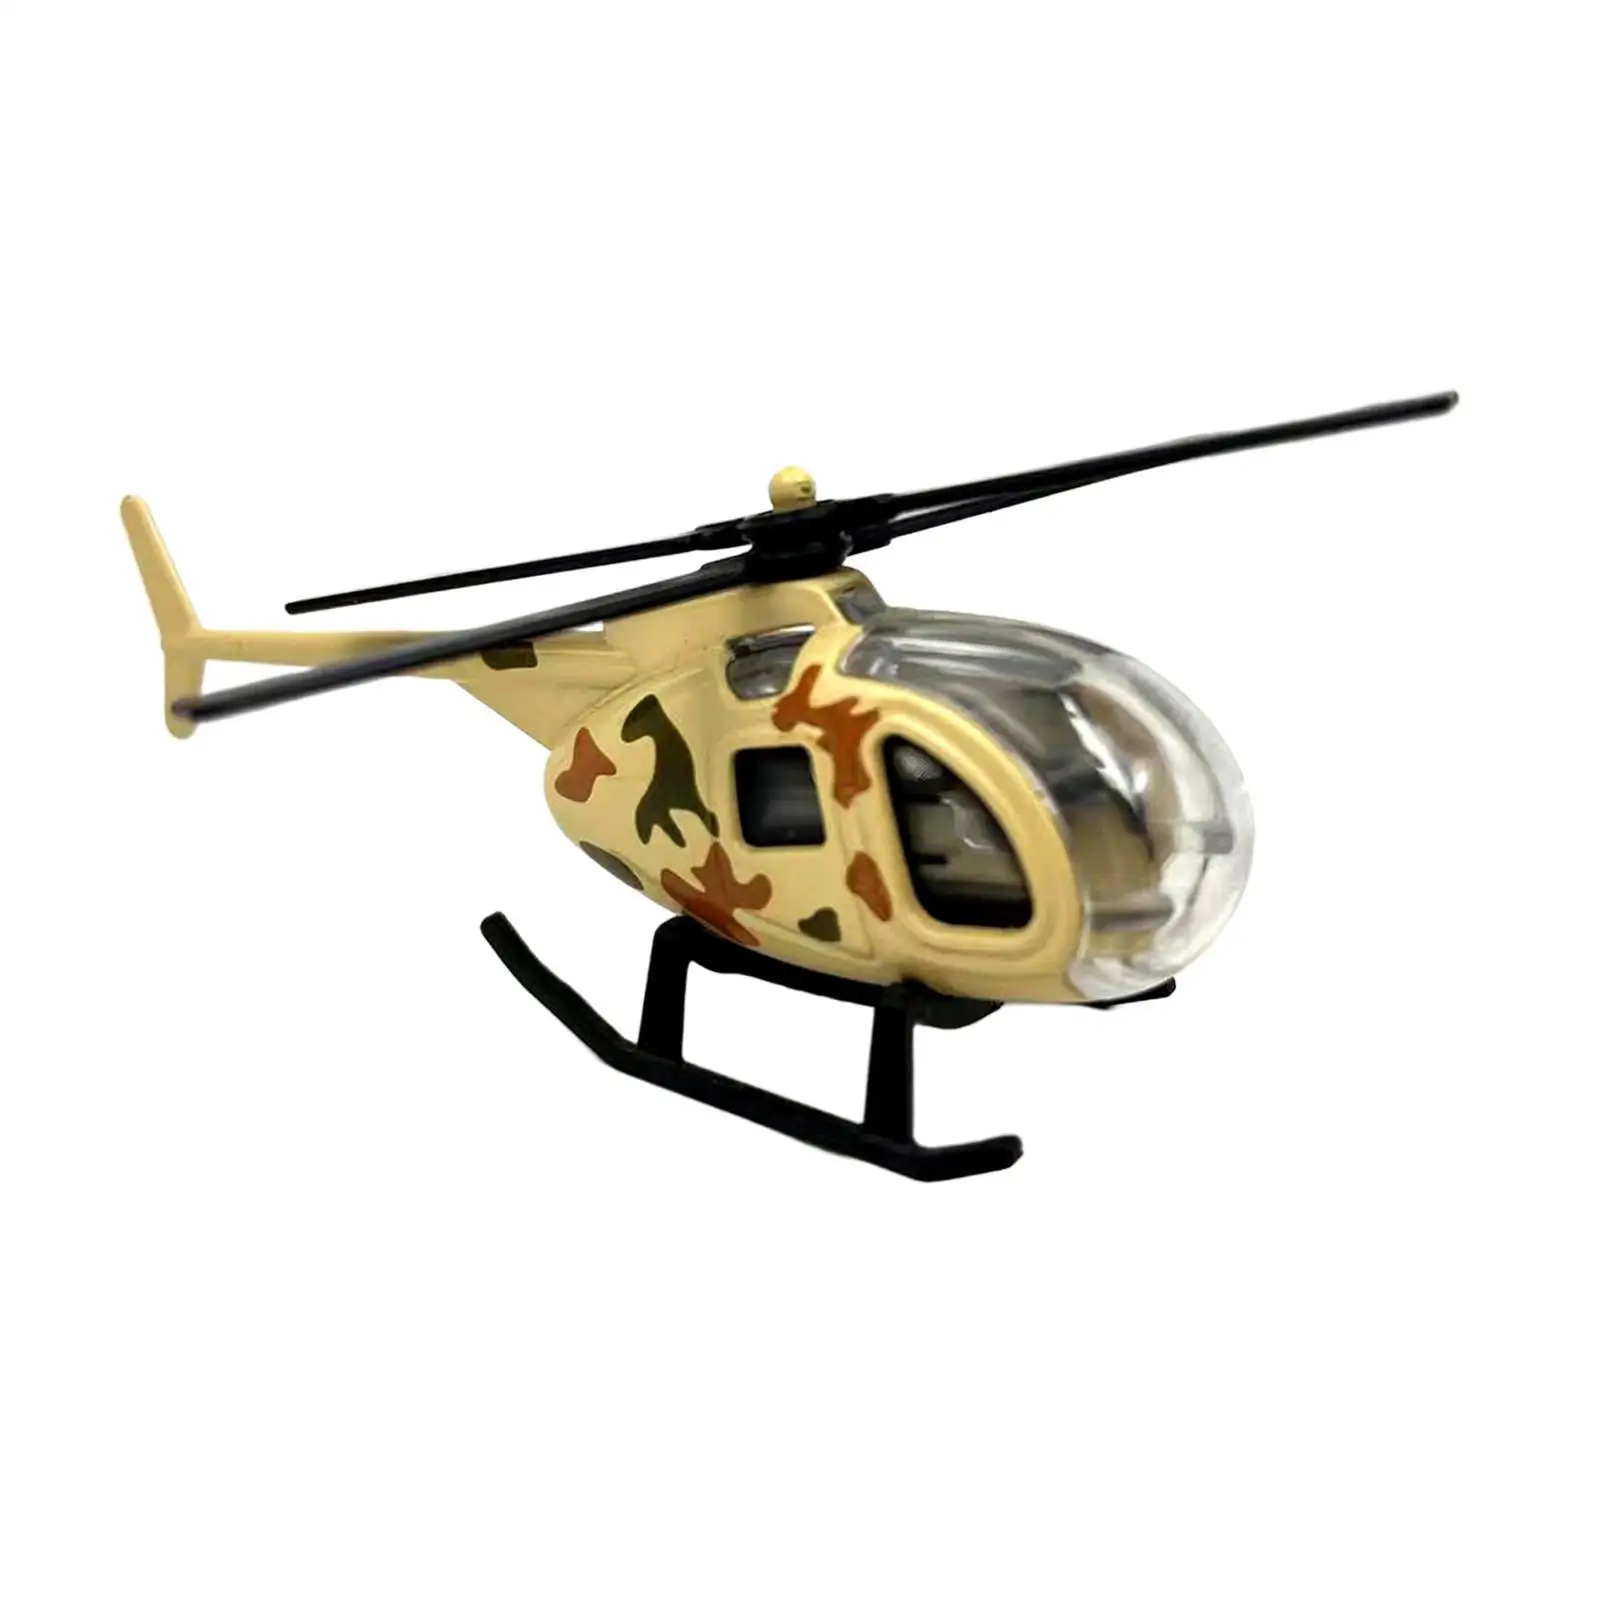 1/64 Scale Diecast Alloy Helicopter Ornament for Boys and Girls Cake Decoration Party Favor Desktop Display Airplane Toy